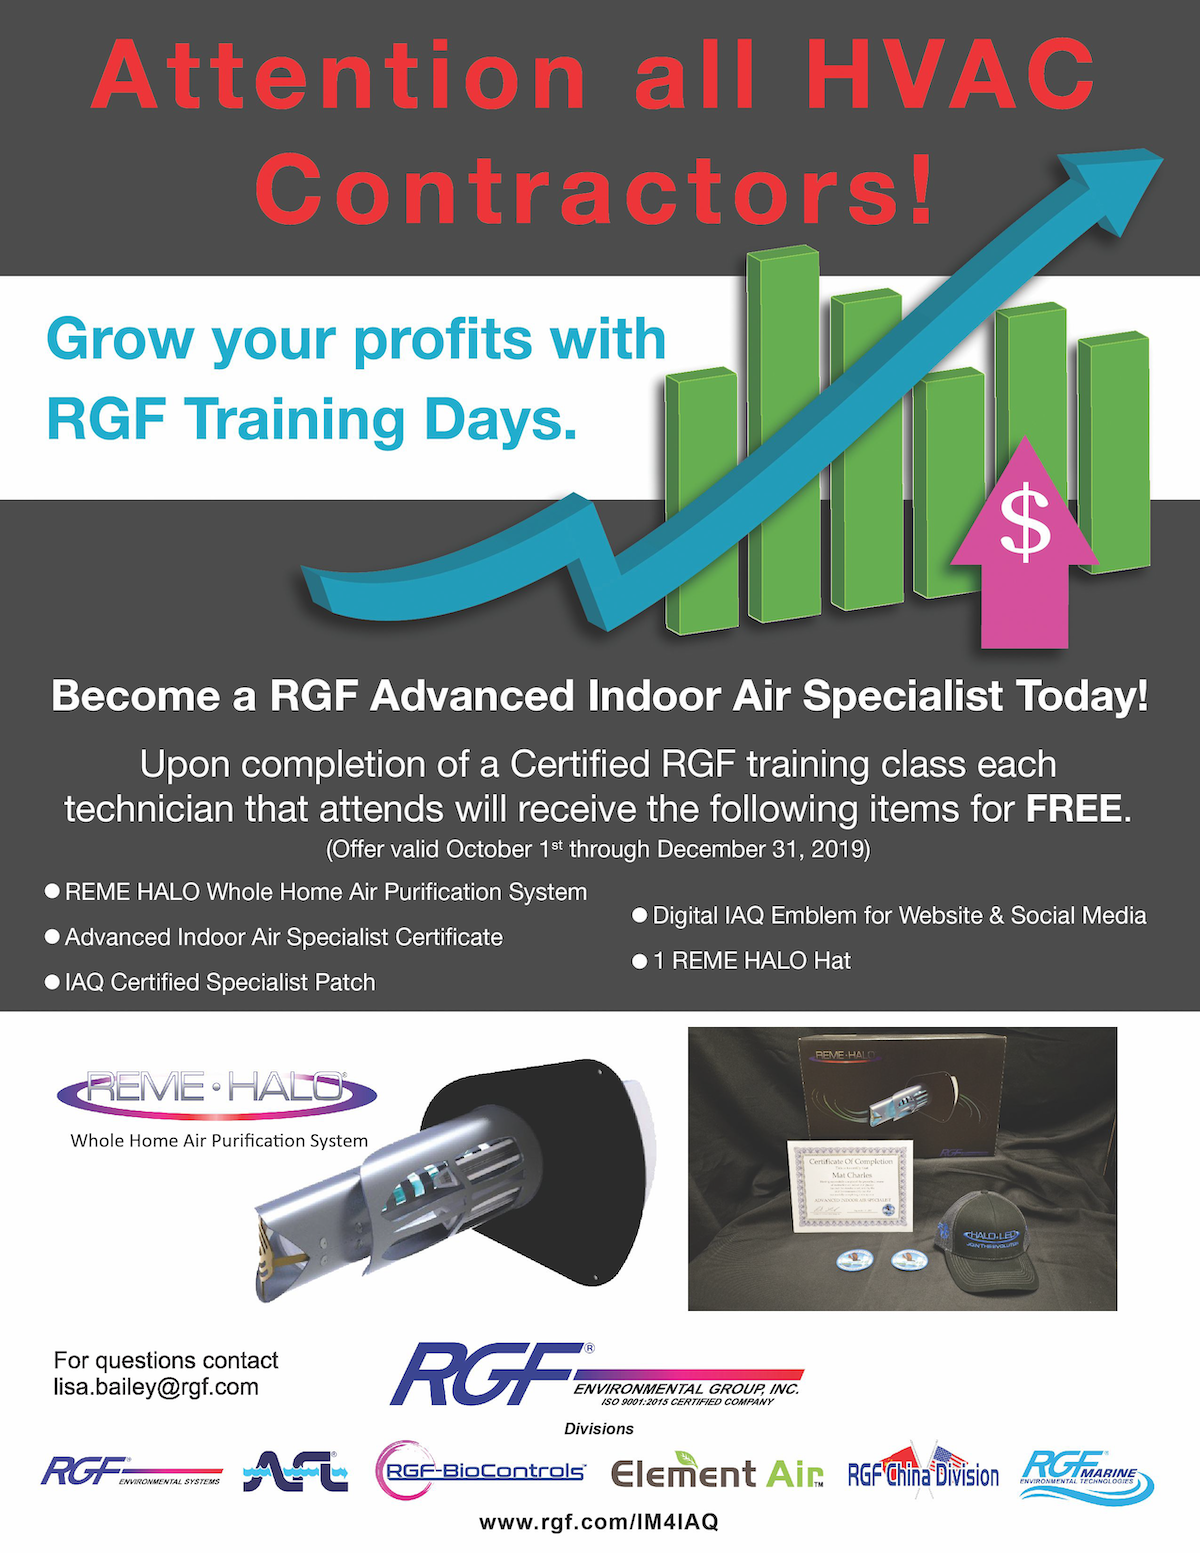 Attention all HVAC contractors